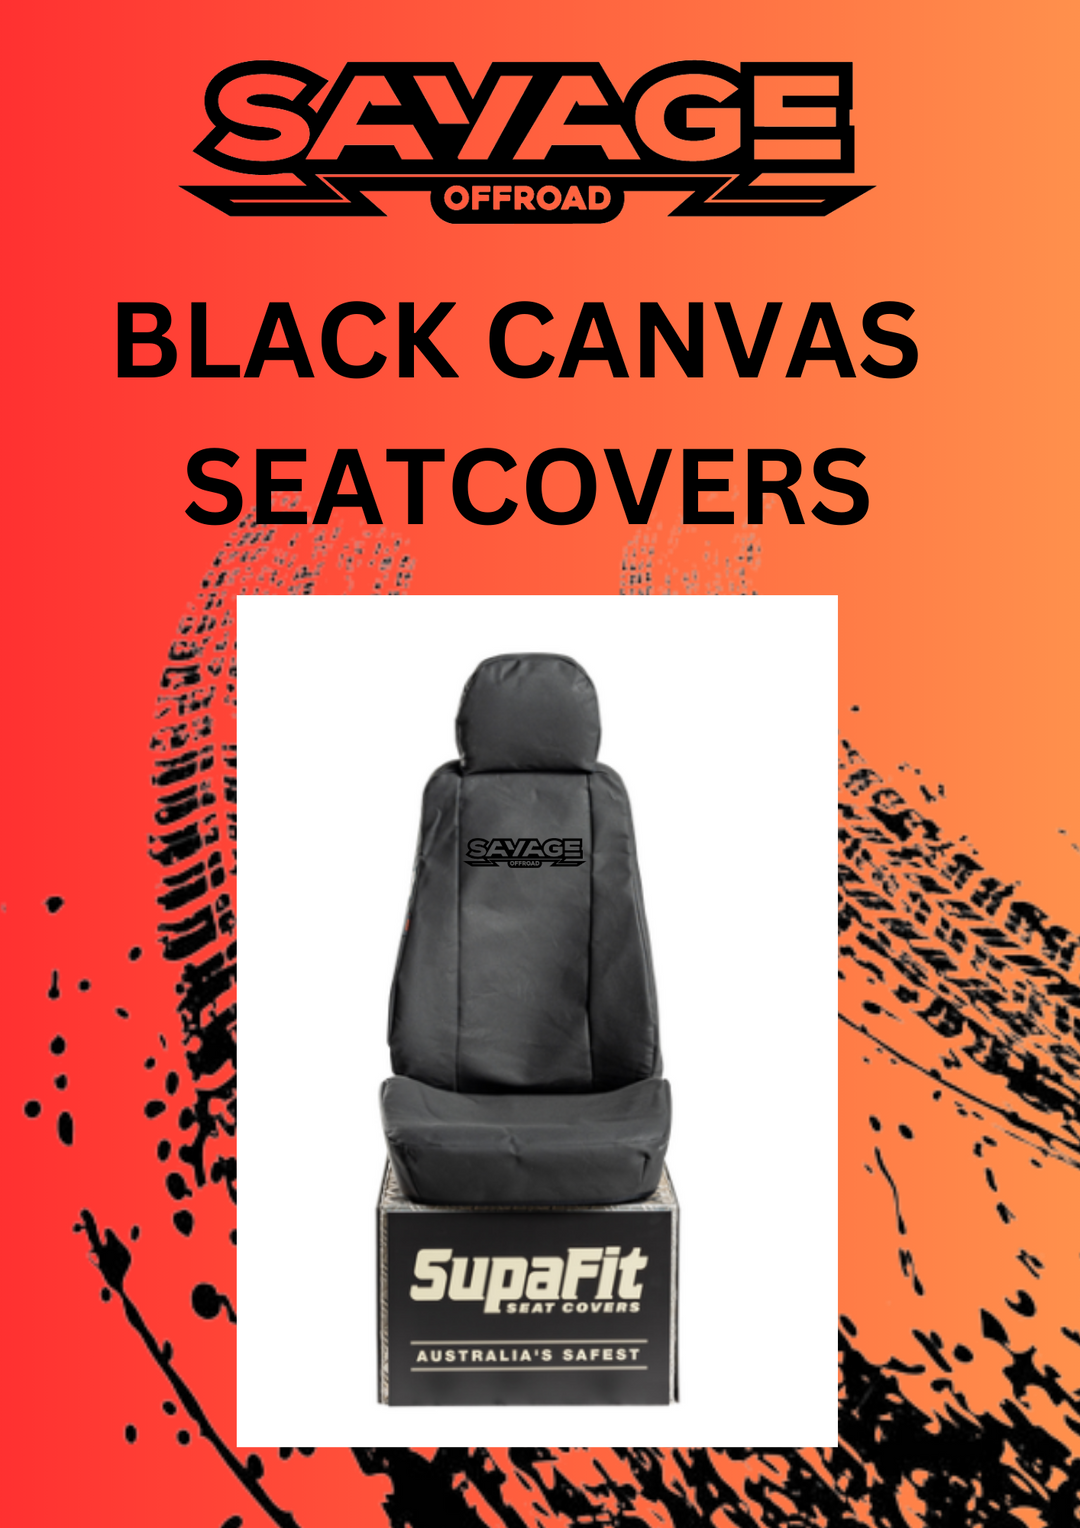 GWM CANNON SAVAGE OFFROAD CANVAS SEATCOVER SET